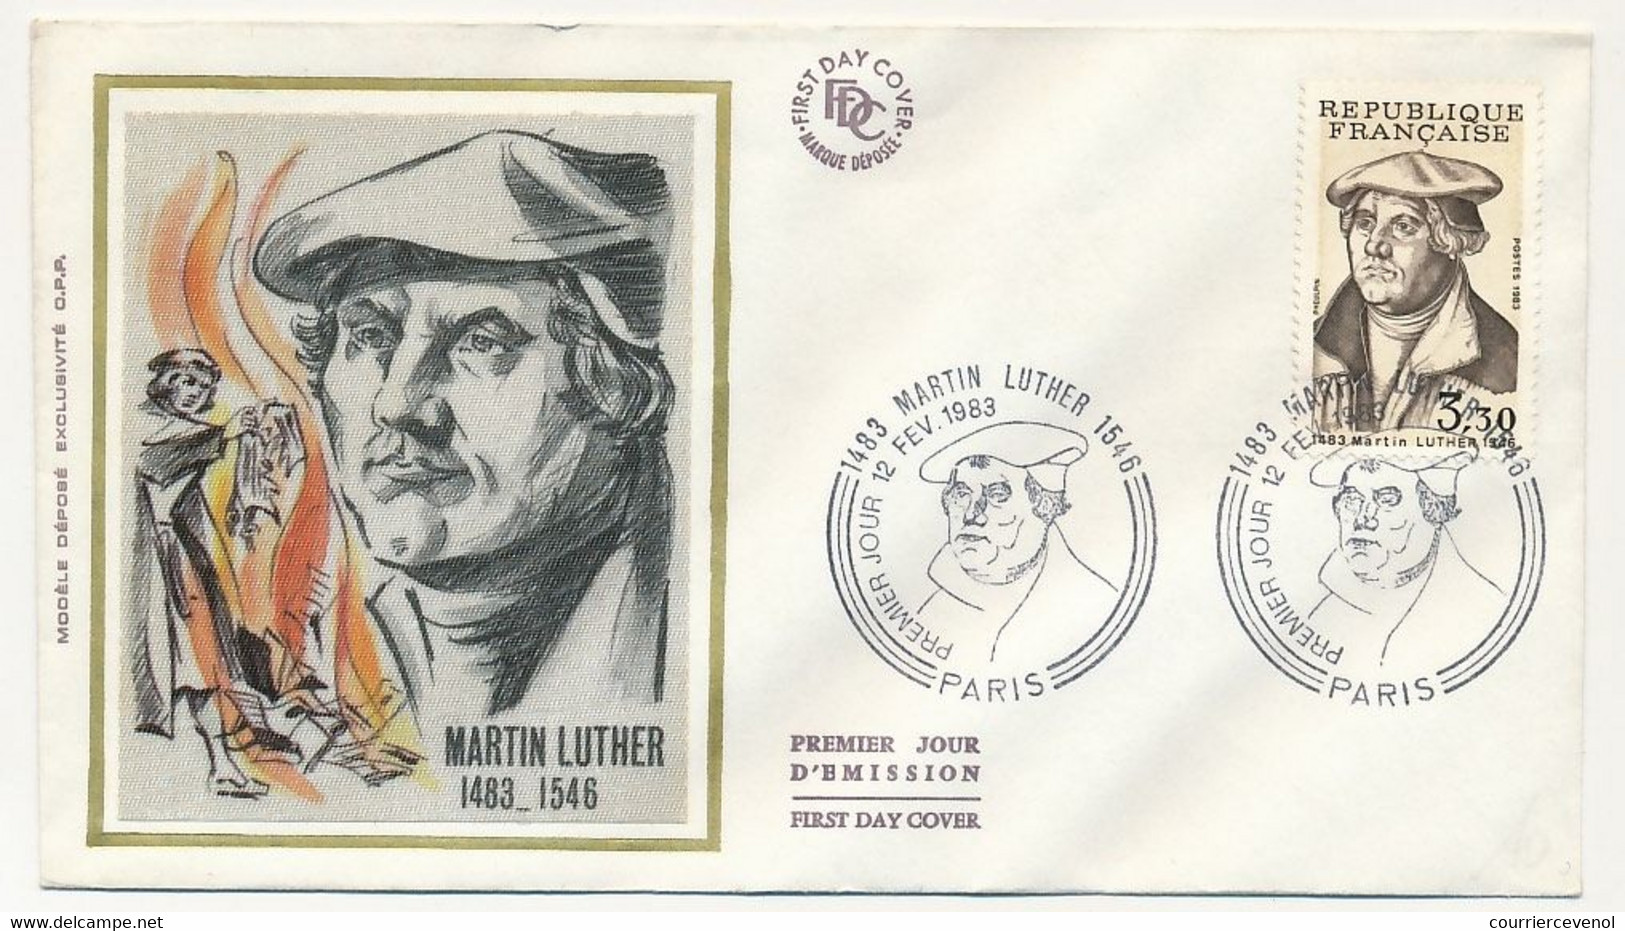 FRANCE - FDC Soie - 3,30F Martin Luther - PARIS - 12 Février 1983 - Christianity